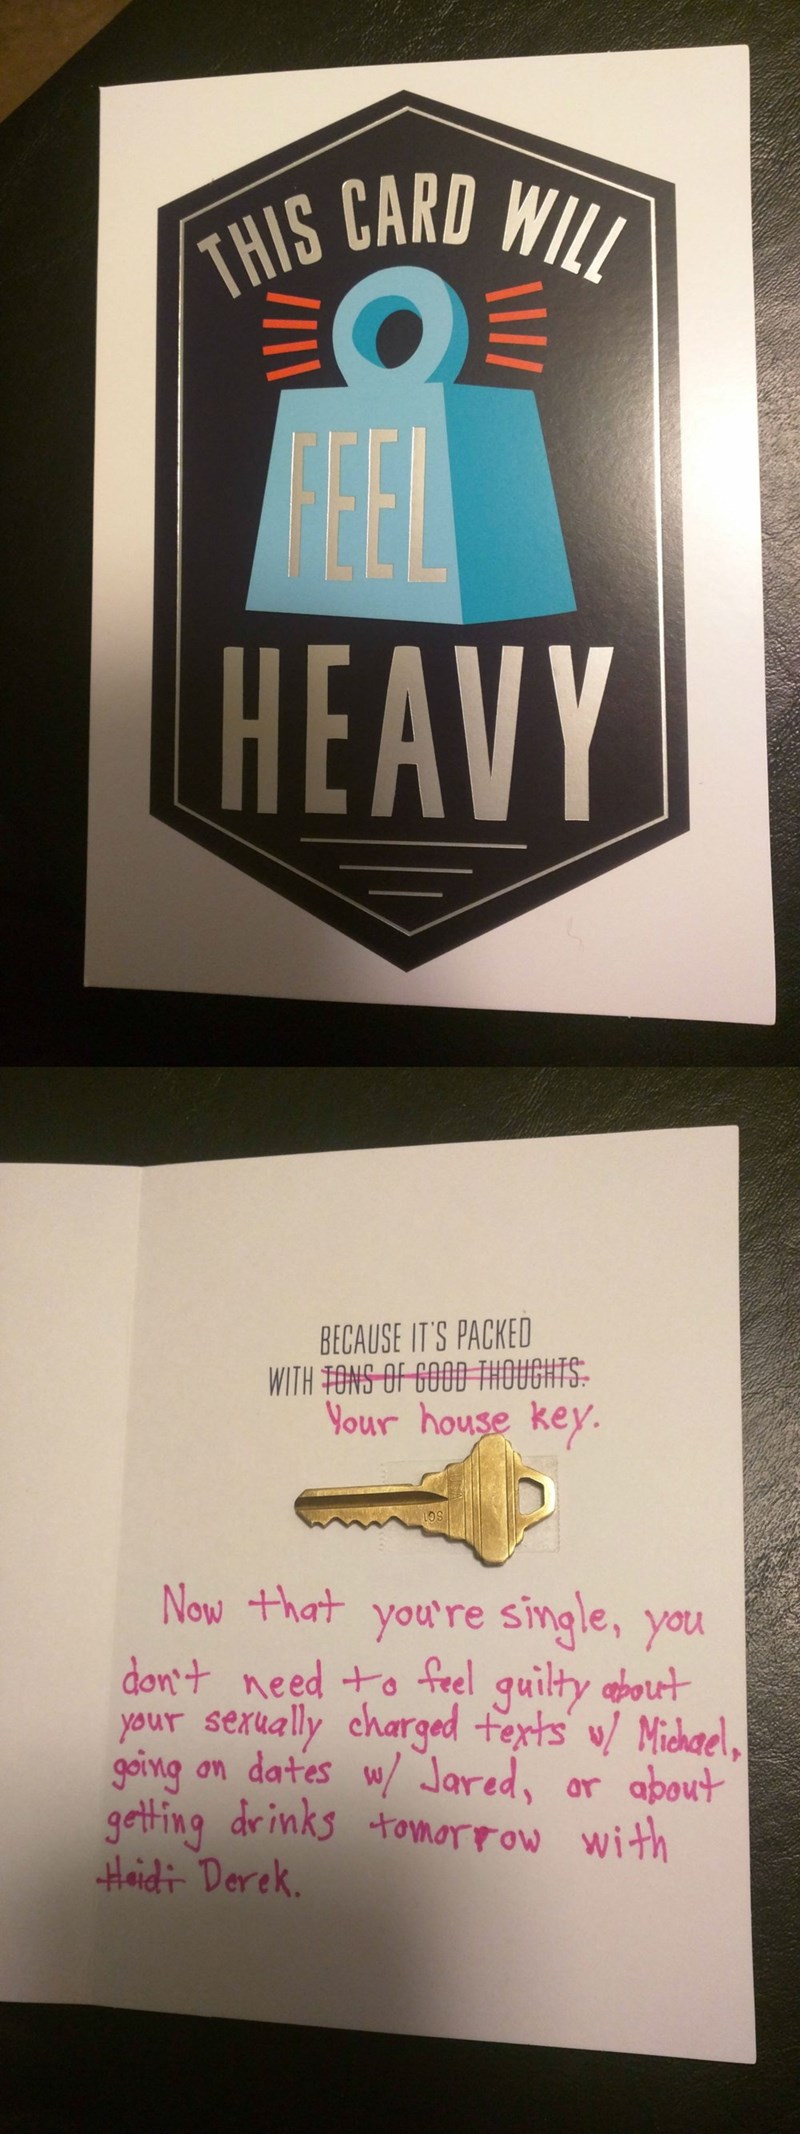 funny dating image guy breaks up IRL with card after discovering his gf was cheating